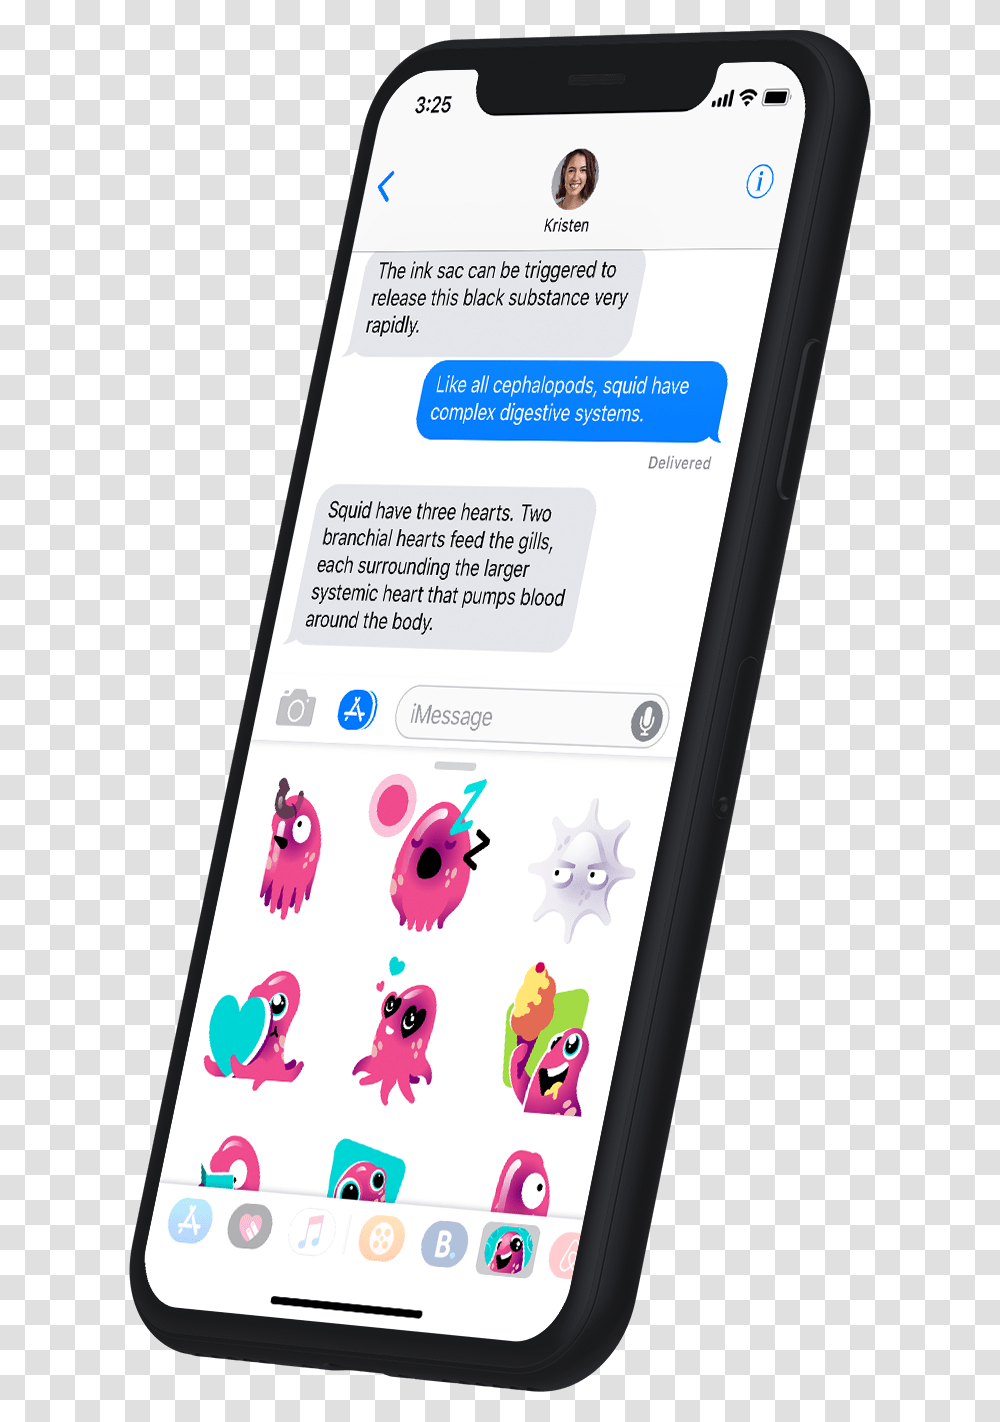 Iphone X Animated Sticker Pack Iphone X Animated, Mobile Phone, Electronics, Cell Phone Transparent Png